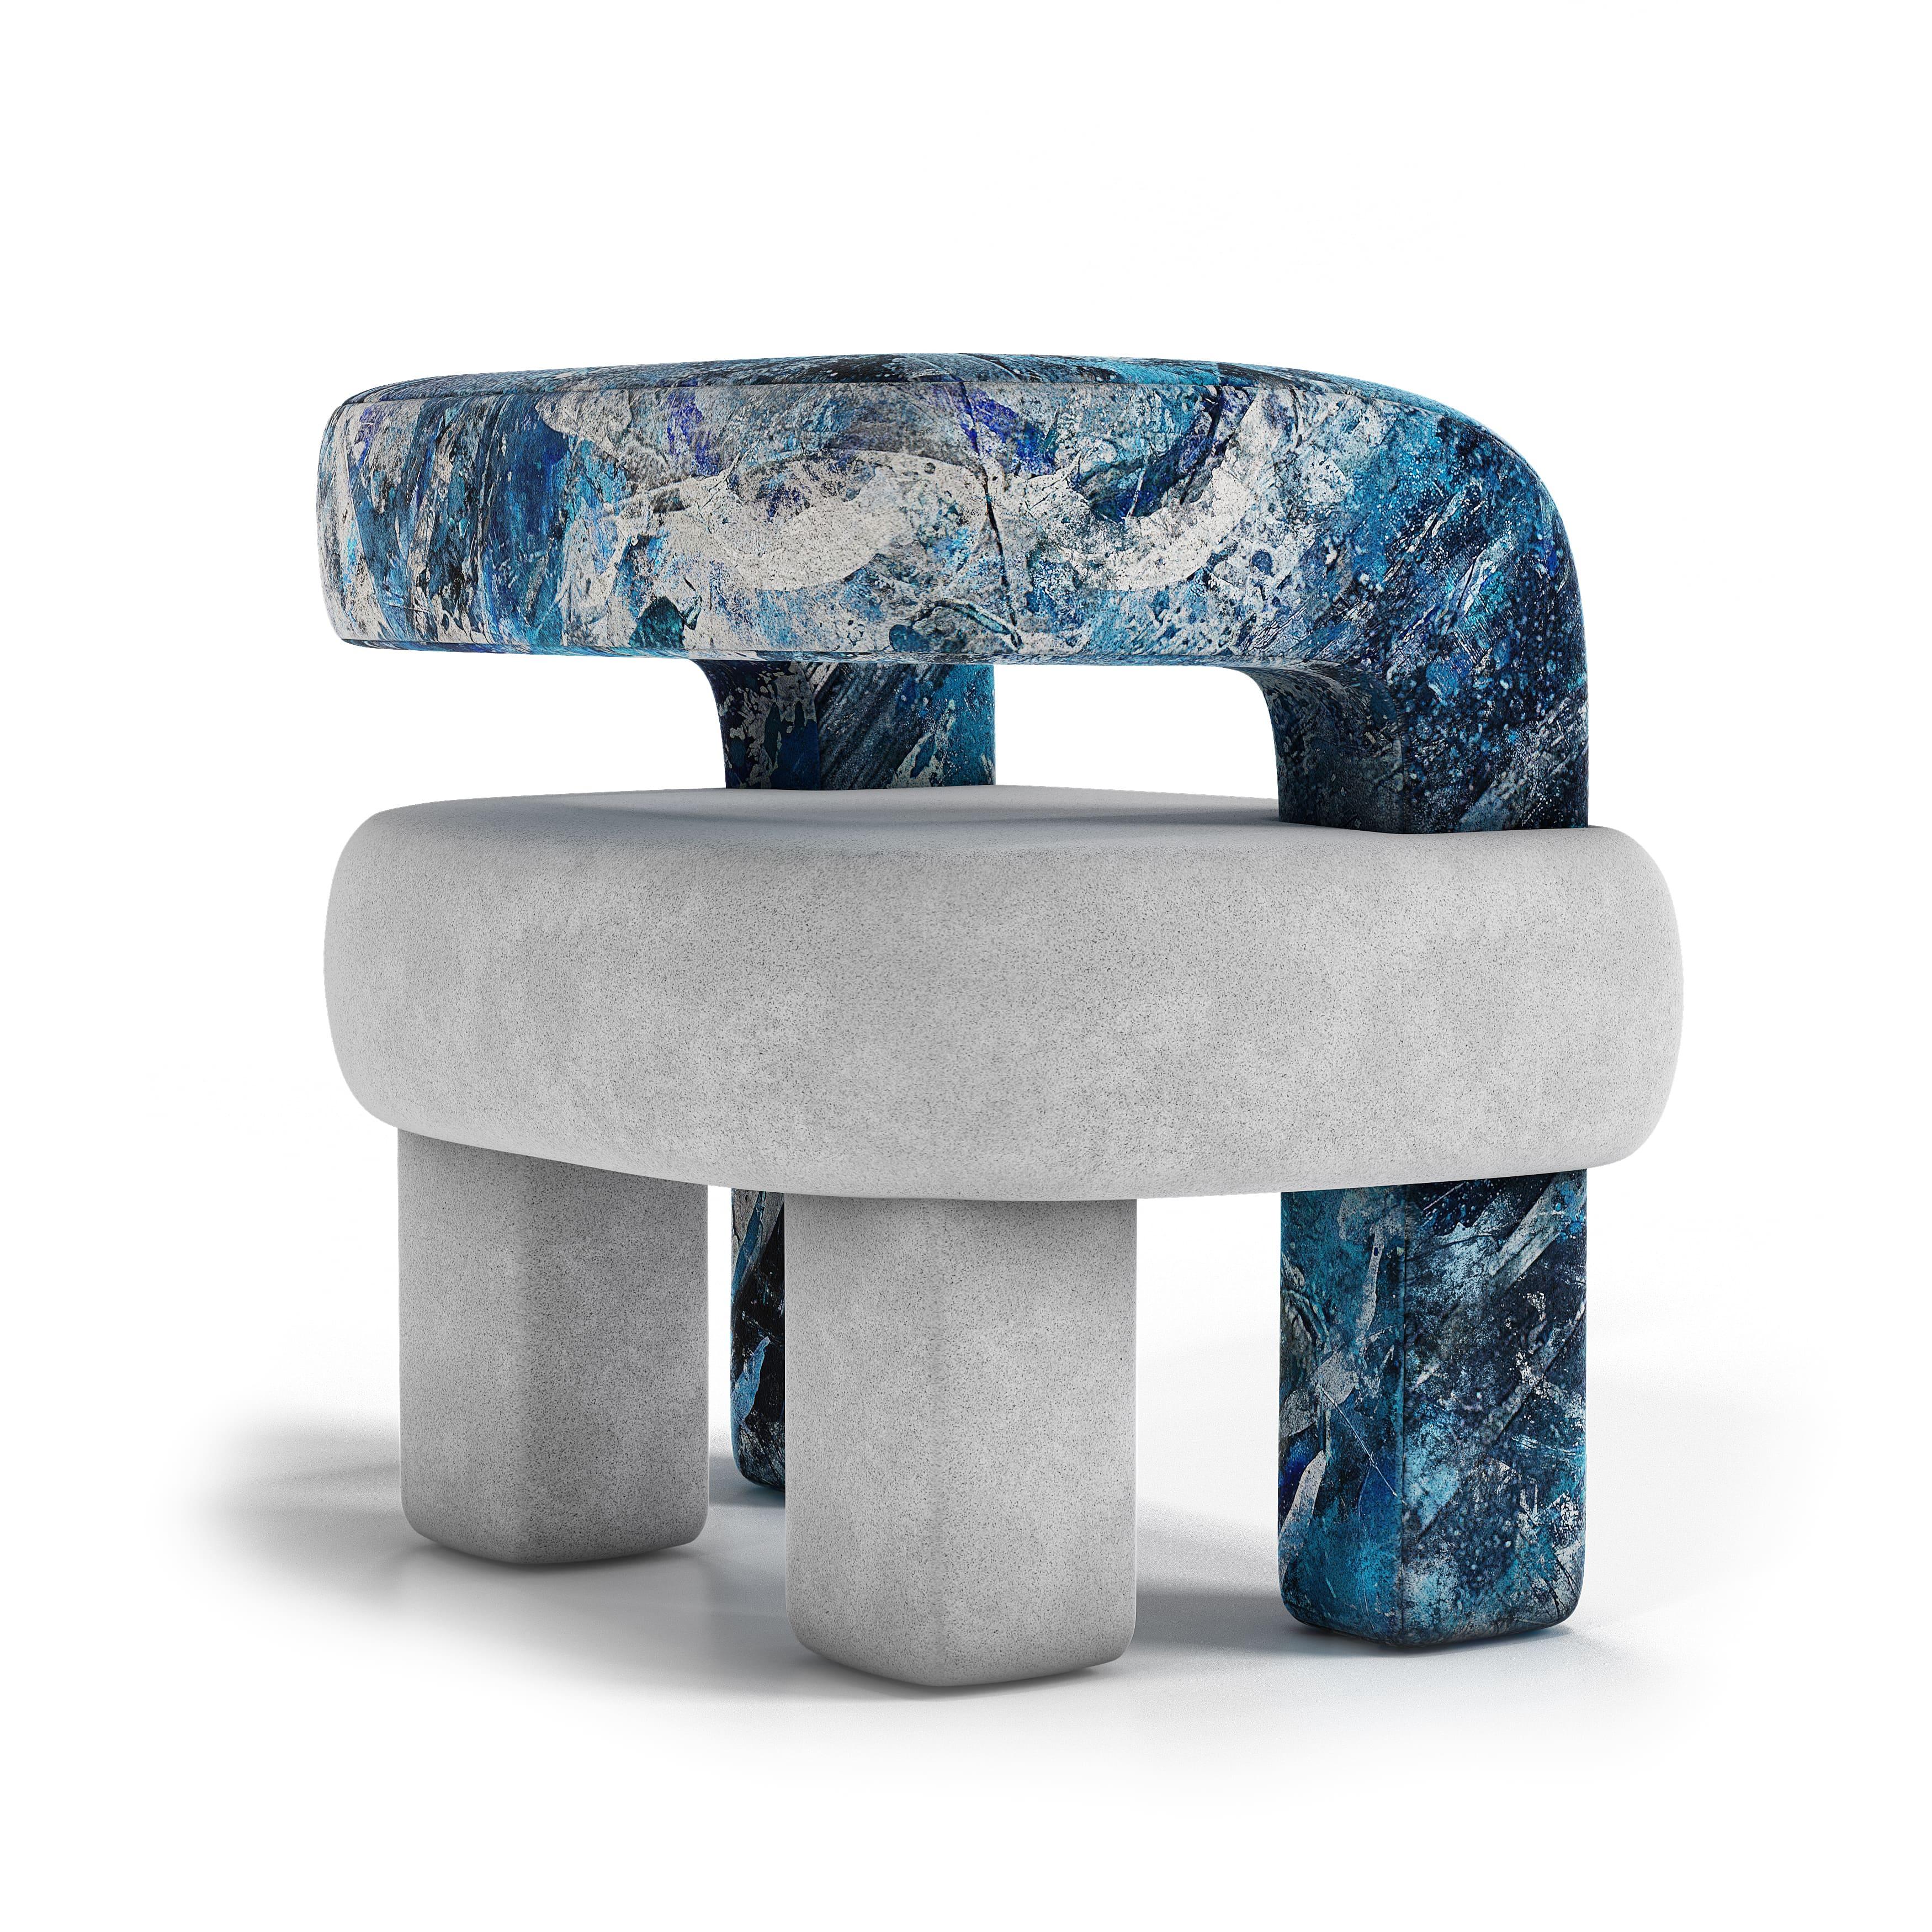 Behspoke presents the limited Oceano armchair collection.

Behspoke partnered with the canada-based contemporary artist Rob Pennino and Joe Fentress Studio, to create a limited edition of stylish and sophisticated armchairs.

The Oceano armchair